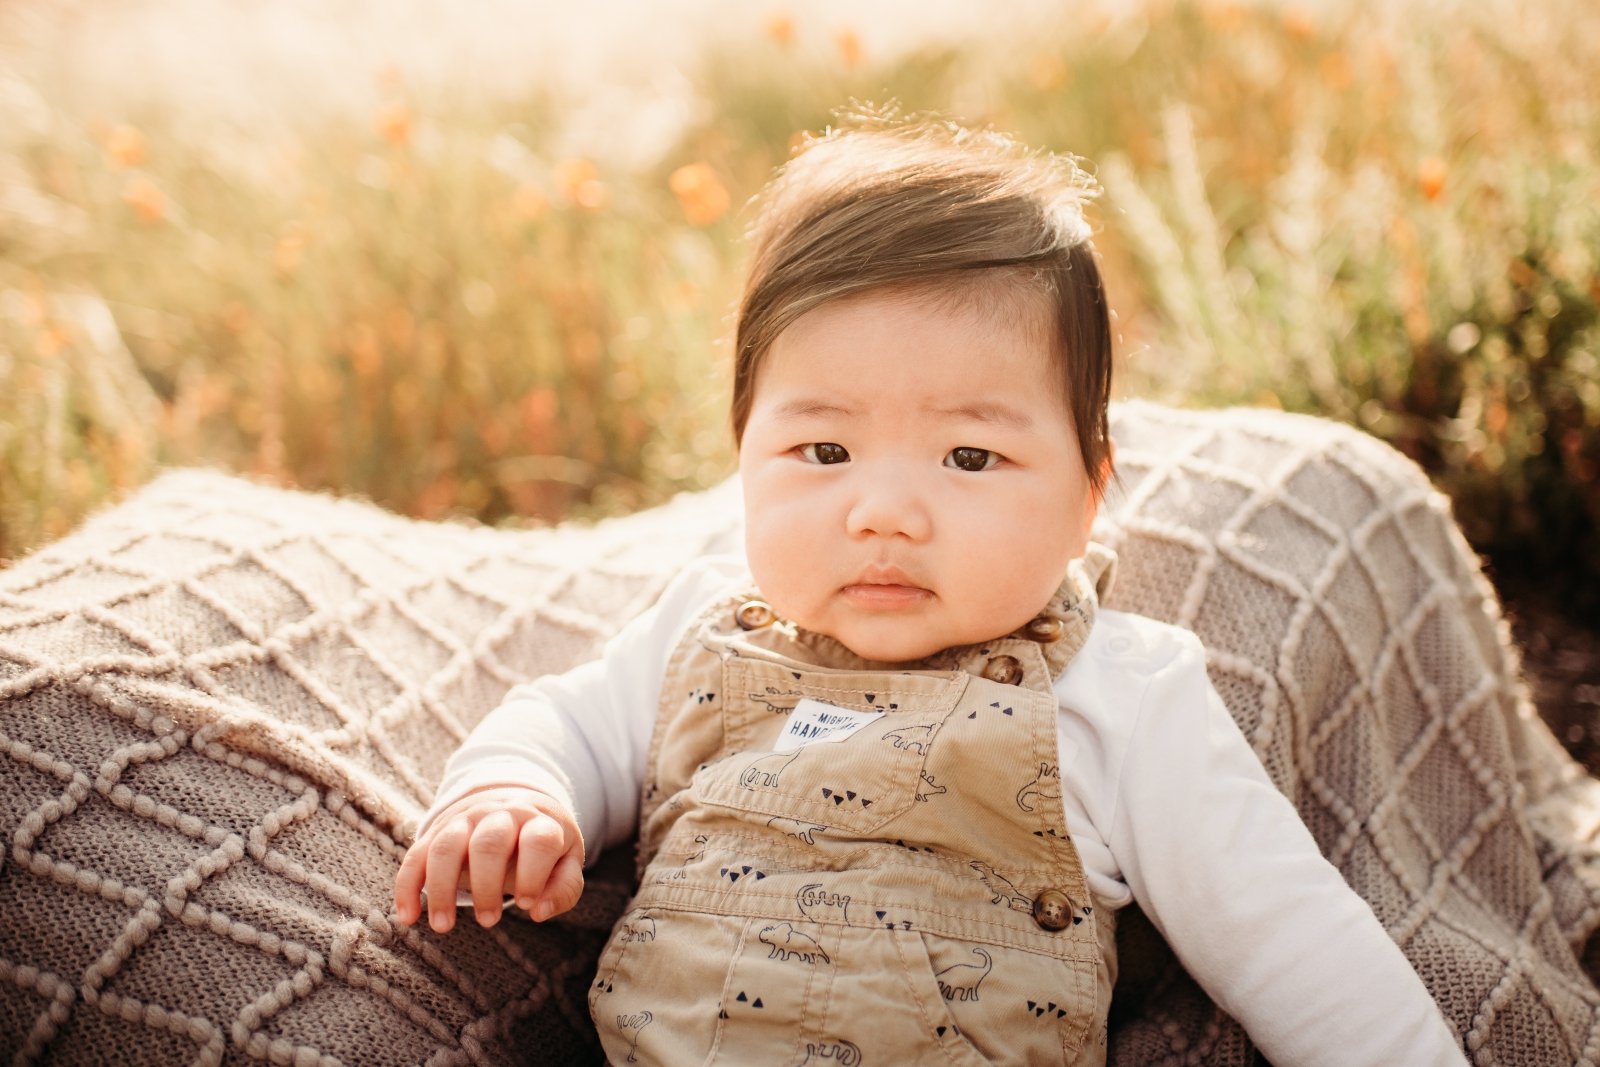 EAST BAY AREA FAMILY PHOTOGRAPHY SHELL RIDGE OPEN SPACE BABY LIFESTYLE PHOTOSHOOT  19.jpg